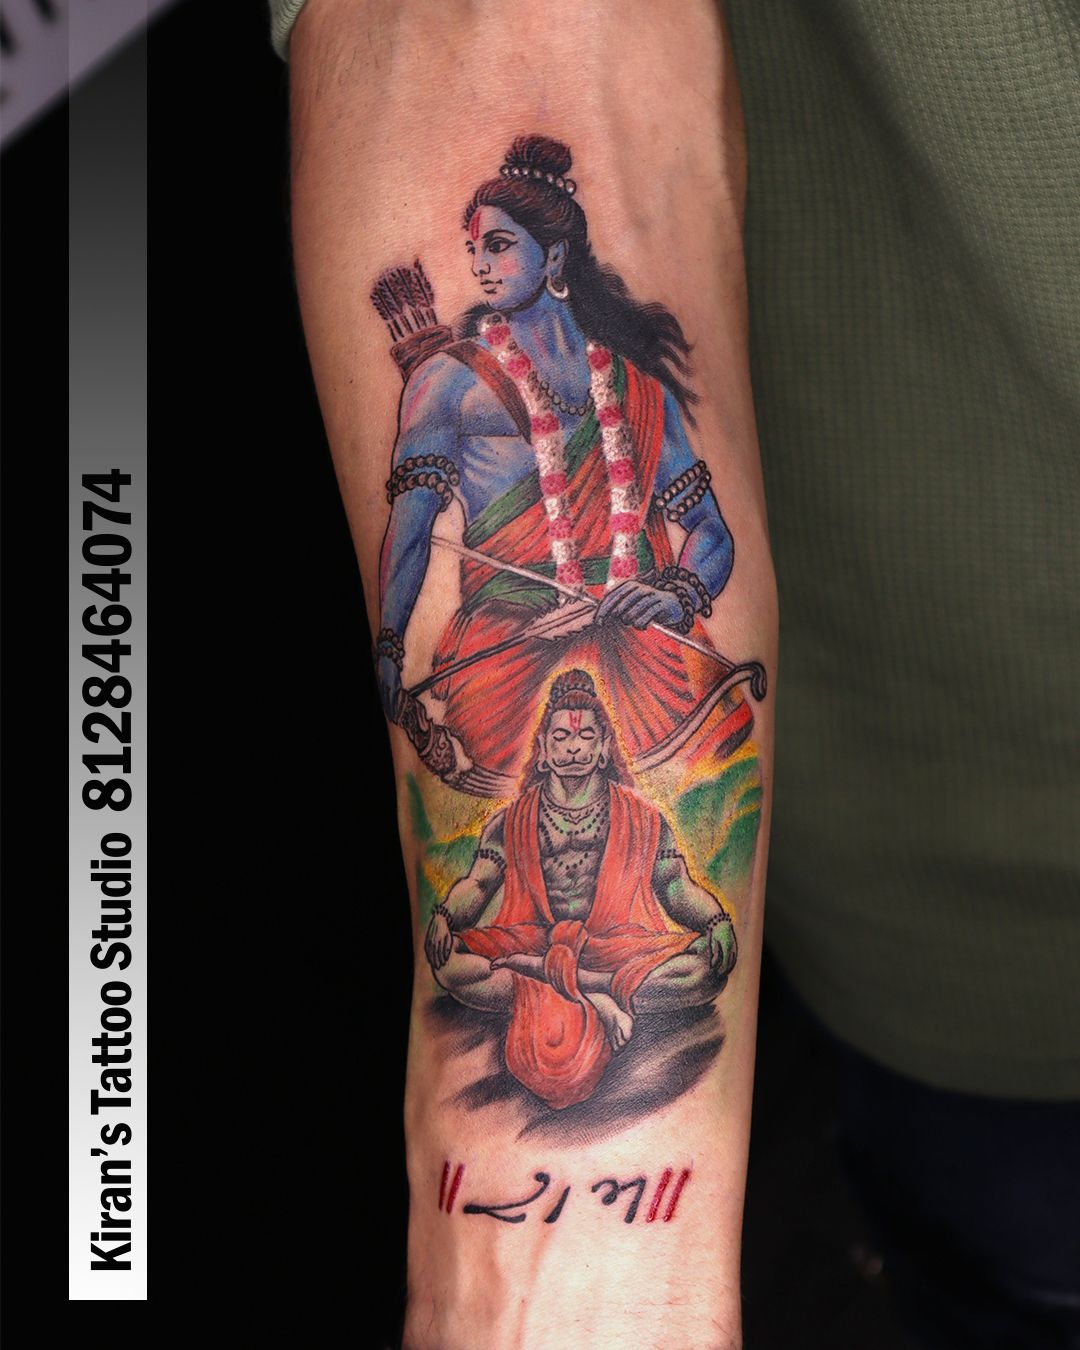 Mac Tattoos Hauz Khas - Jai Shree Ram piece inked at @mac_tattoos_  #hauzkhas For appointments do call or what's app us on : +91 8851 012 863  +91 7042 130 654 Thanks for looking 😊 #lordramatattoo #ramatattoo  #ramtattoo #forearmtattoo ...